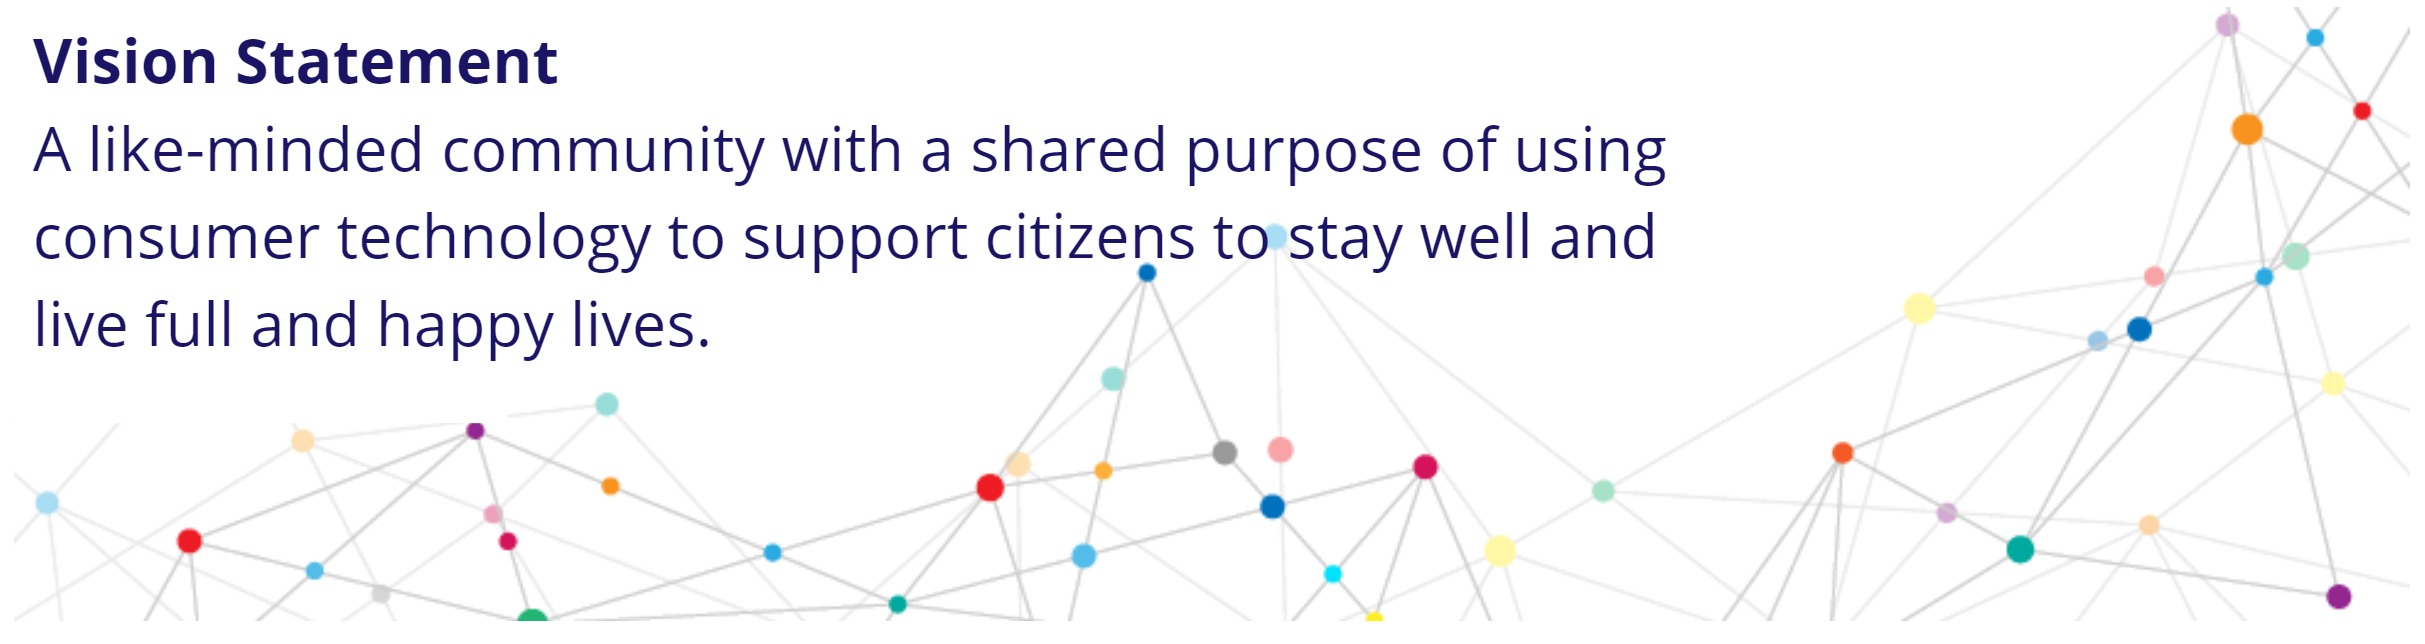 Vision Statement-A like-minded community with a shared purpose of using consumer technology to support citizens to stay well and live full and happy lives.